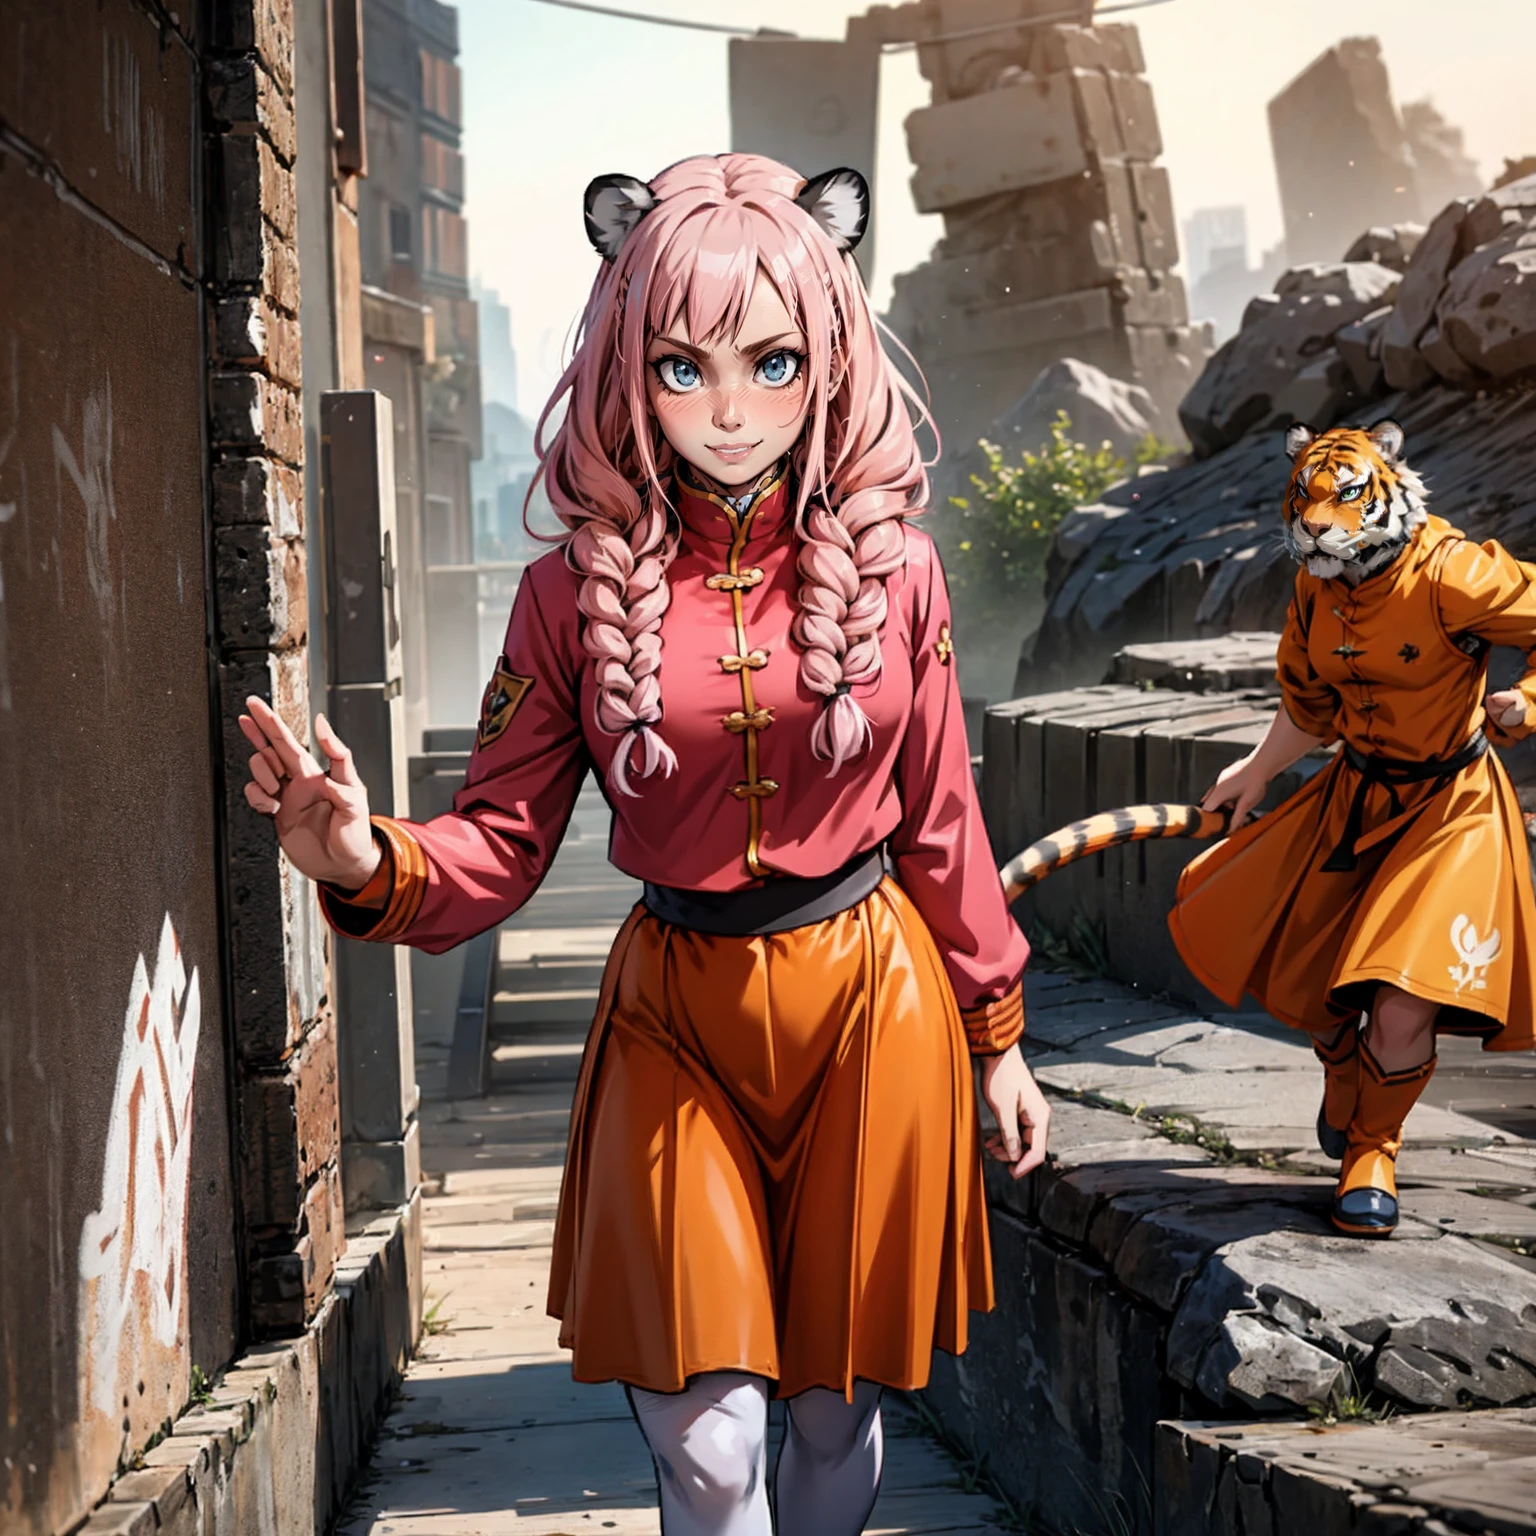 , tiger ears, tiger tails, martial art, medium chest, pink hair, skirt, jacket, godess,1girl,coat,walking, solo focus.1character, holy catholic mountain, smile, large skirt, long skirt, pullover, background ruins